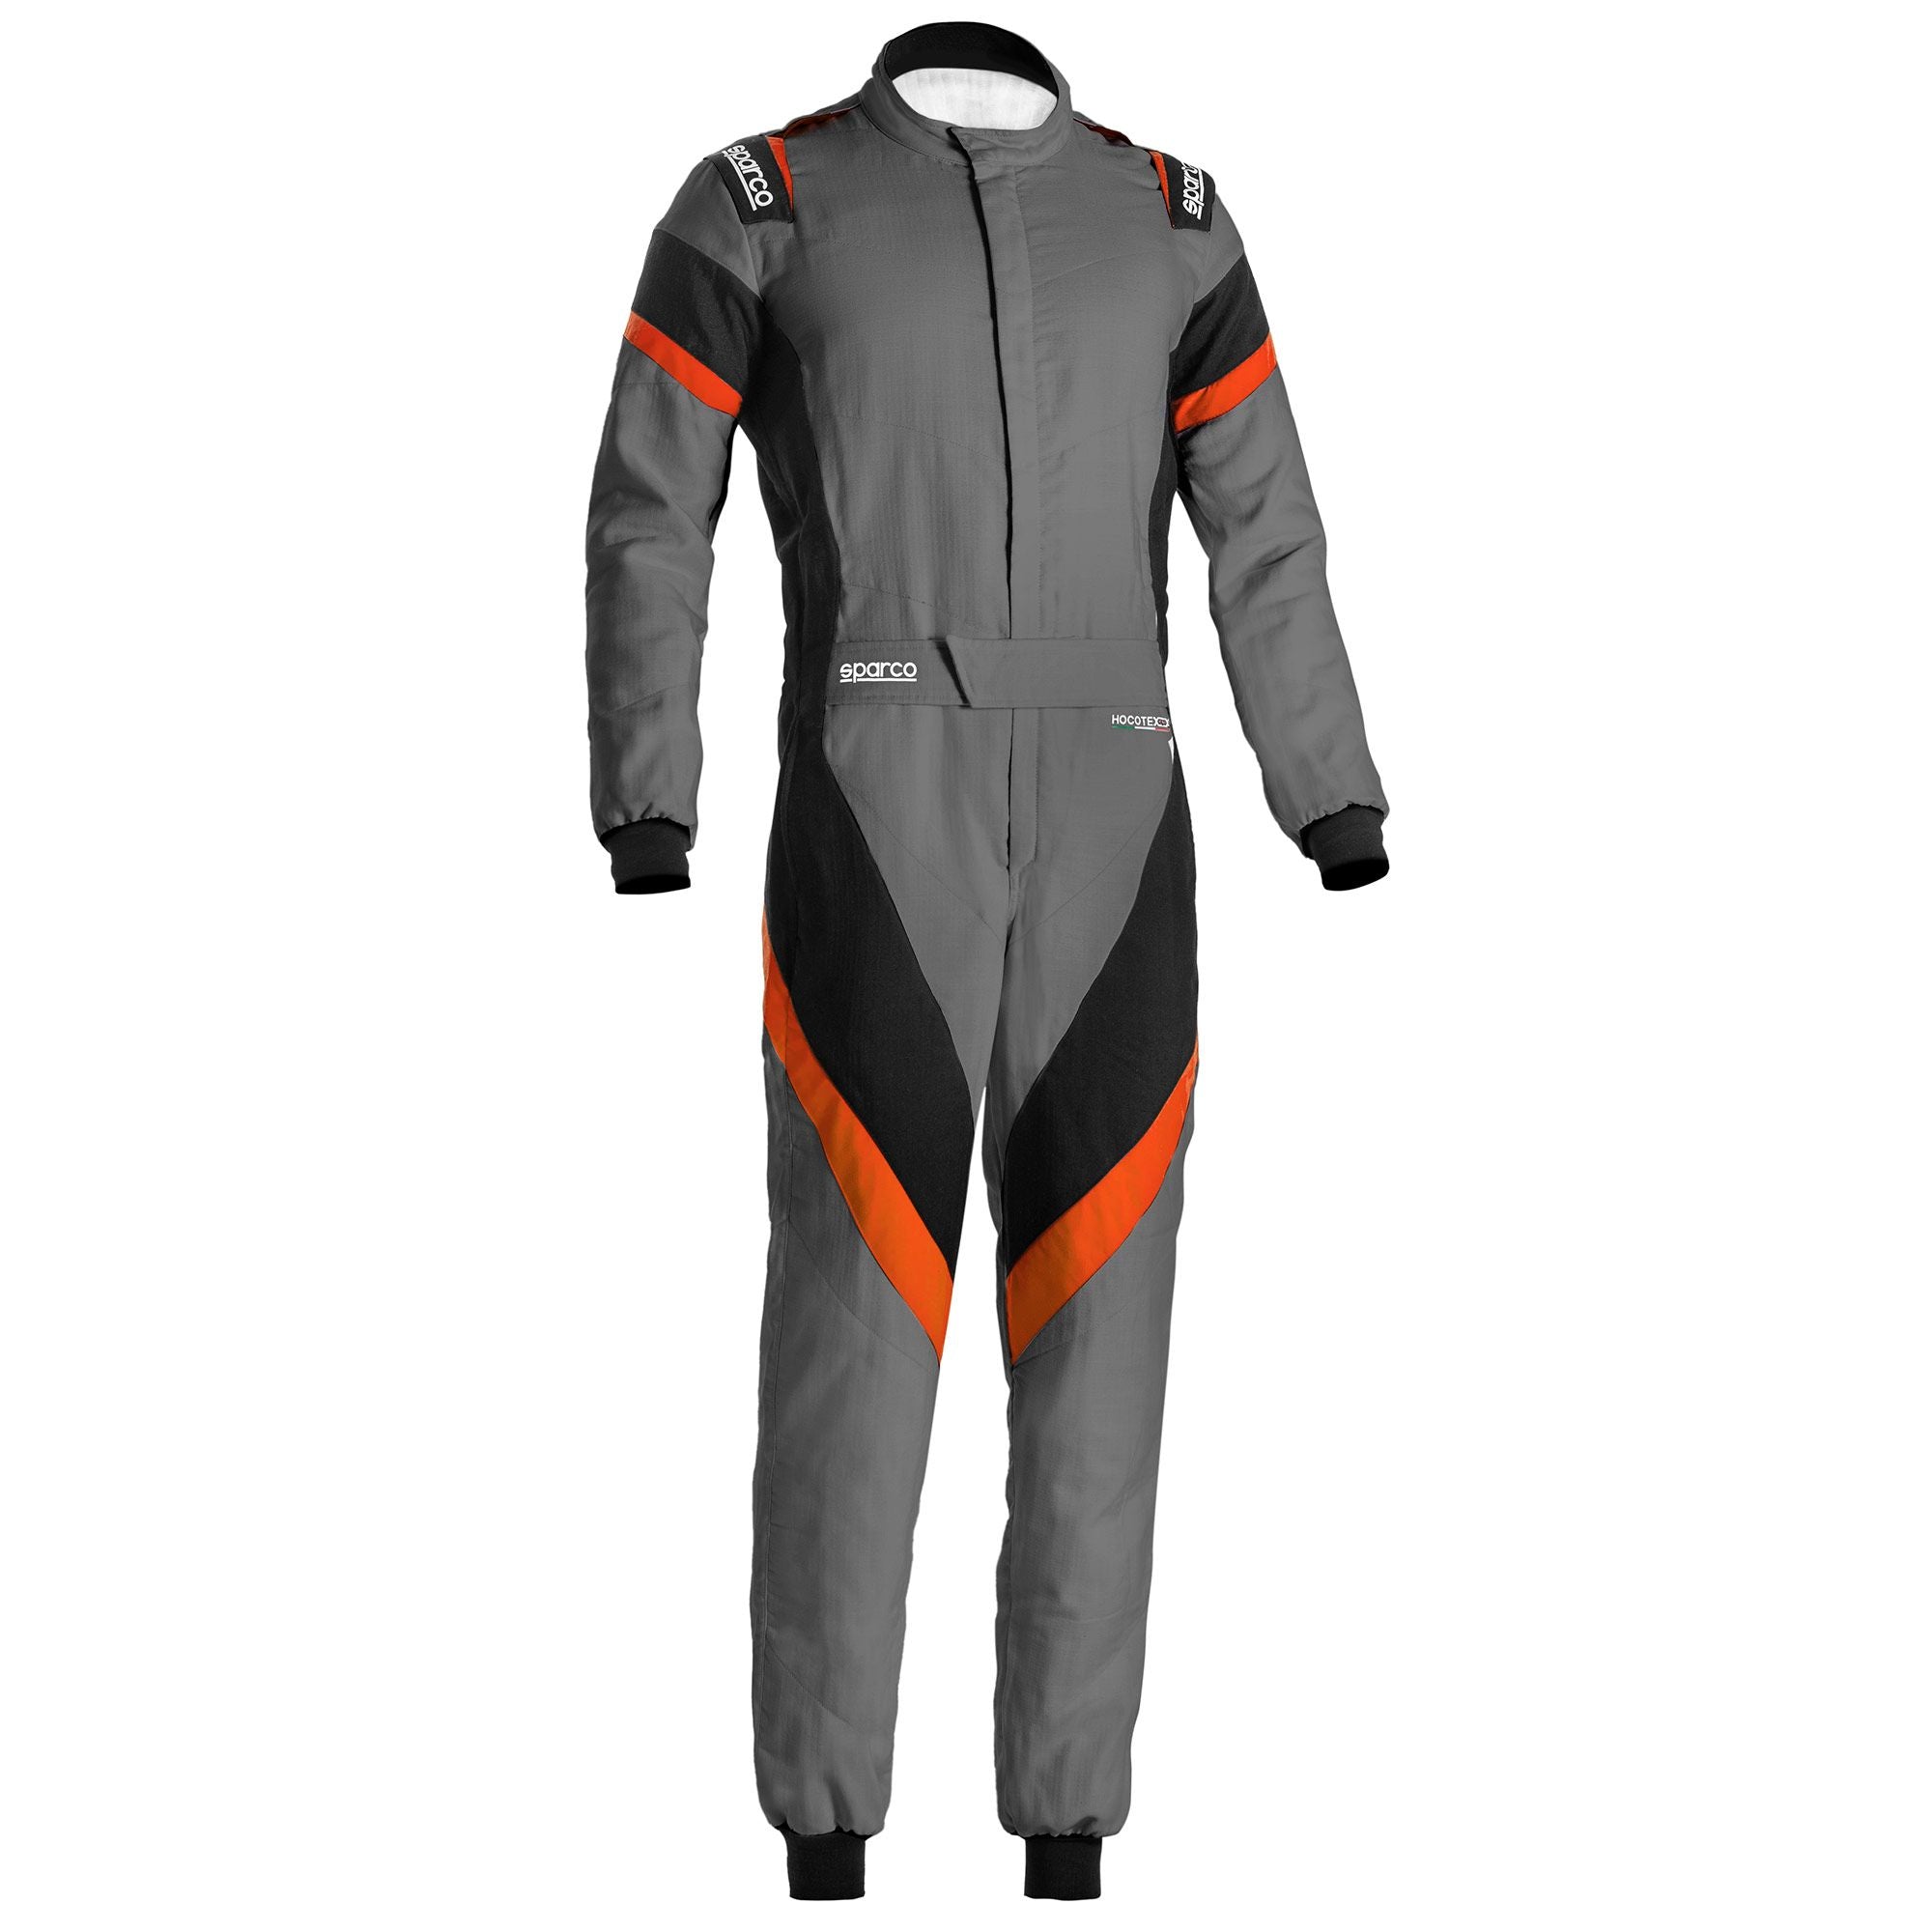 Sparco Victory Suit - Saferacer